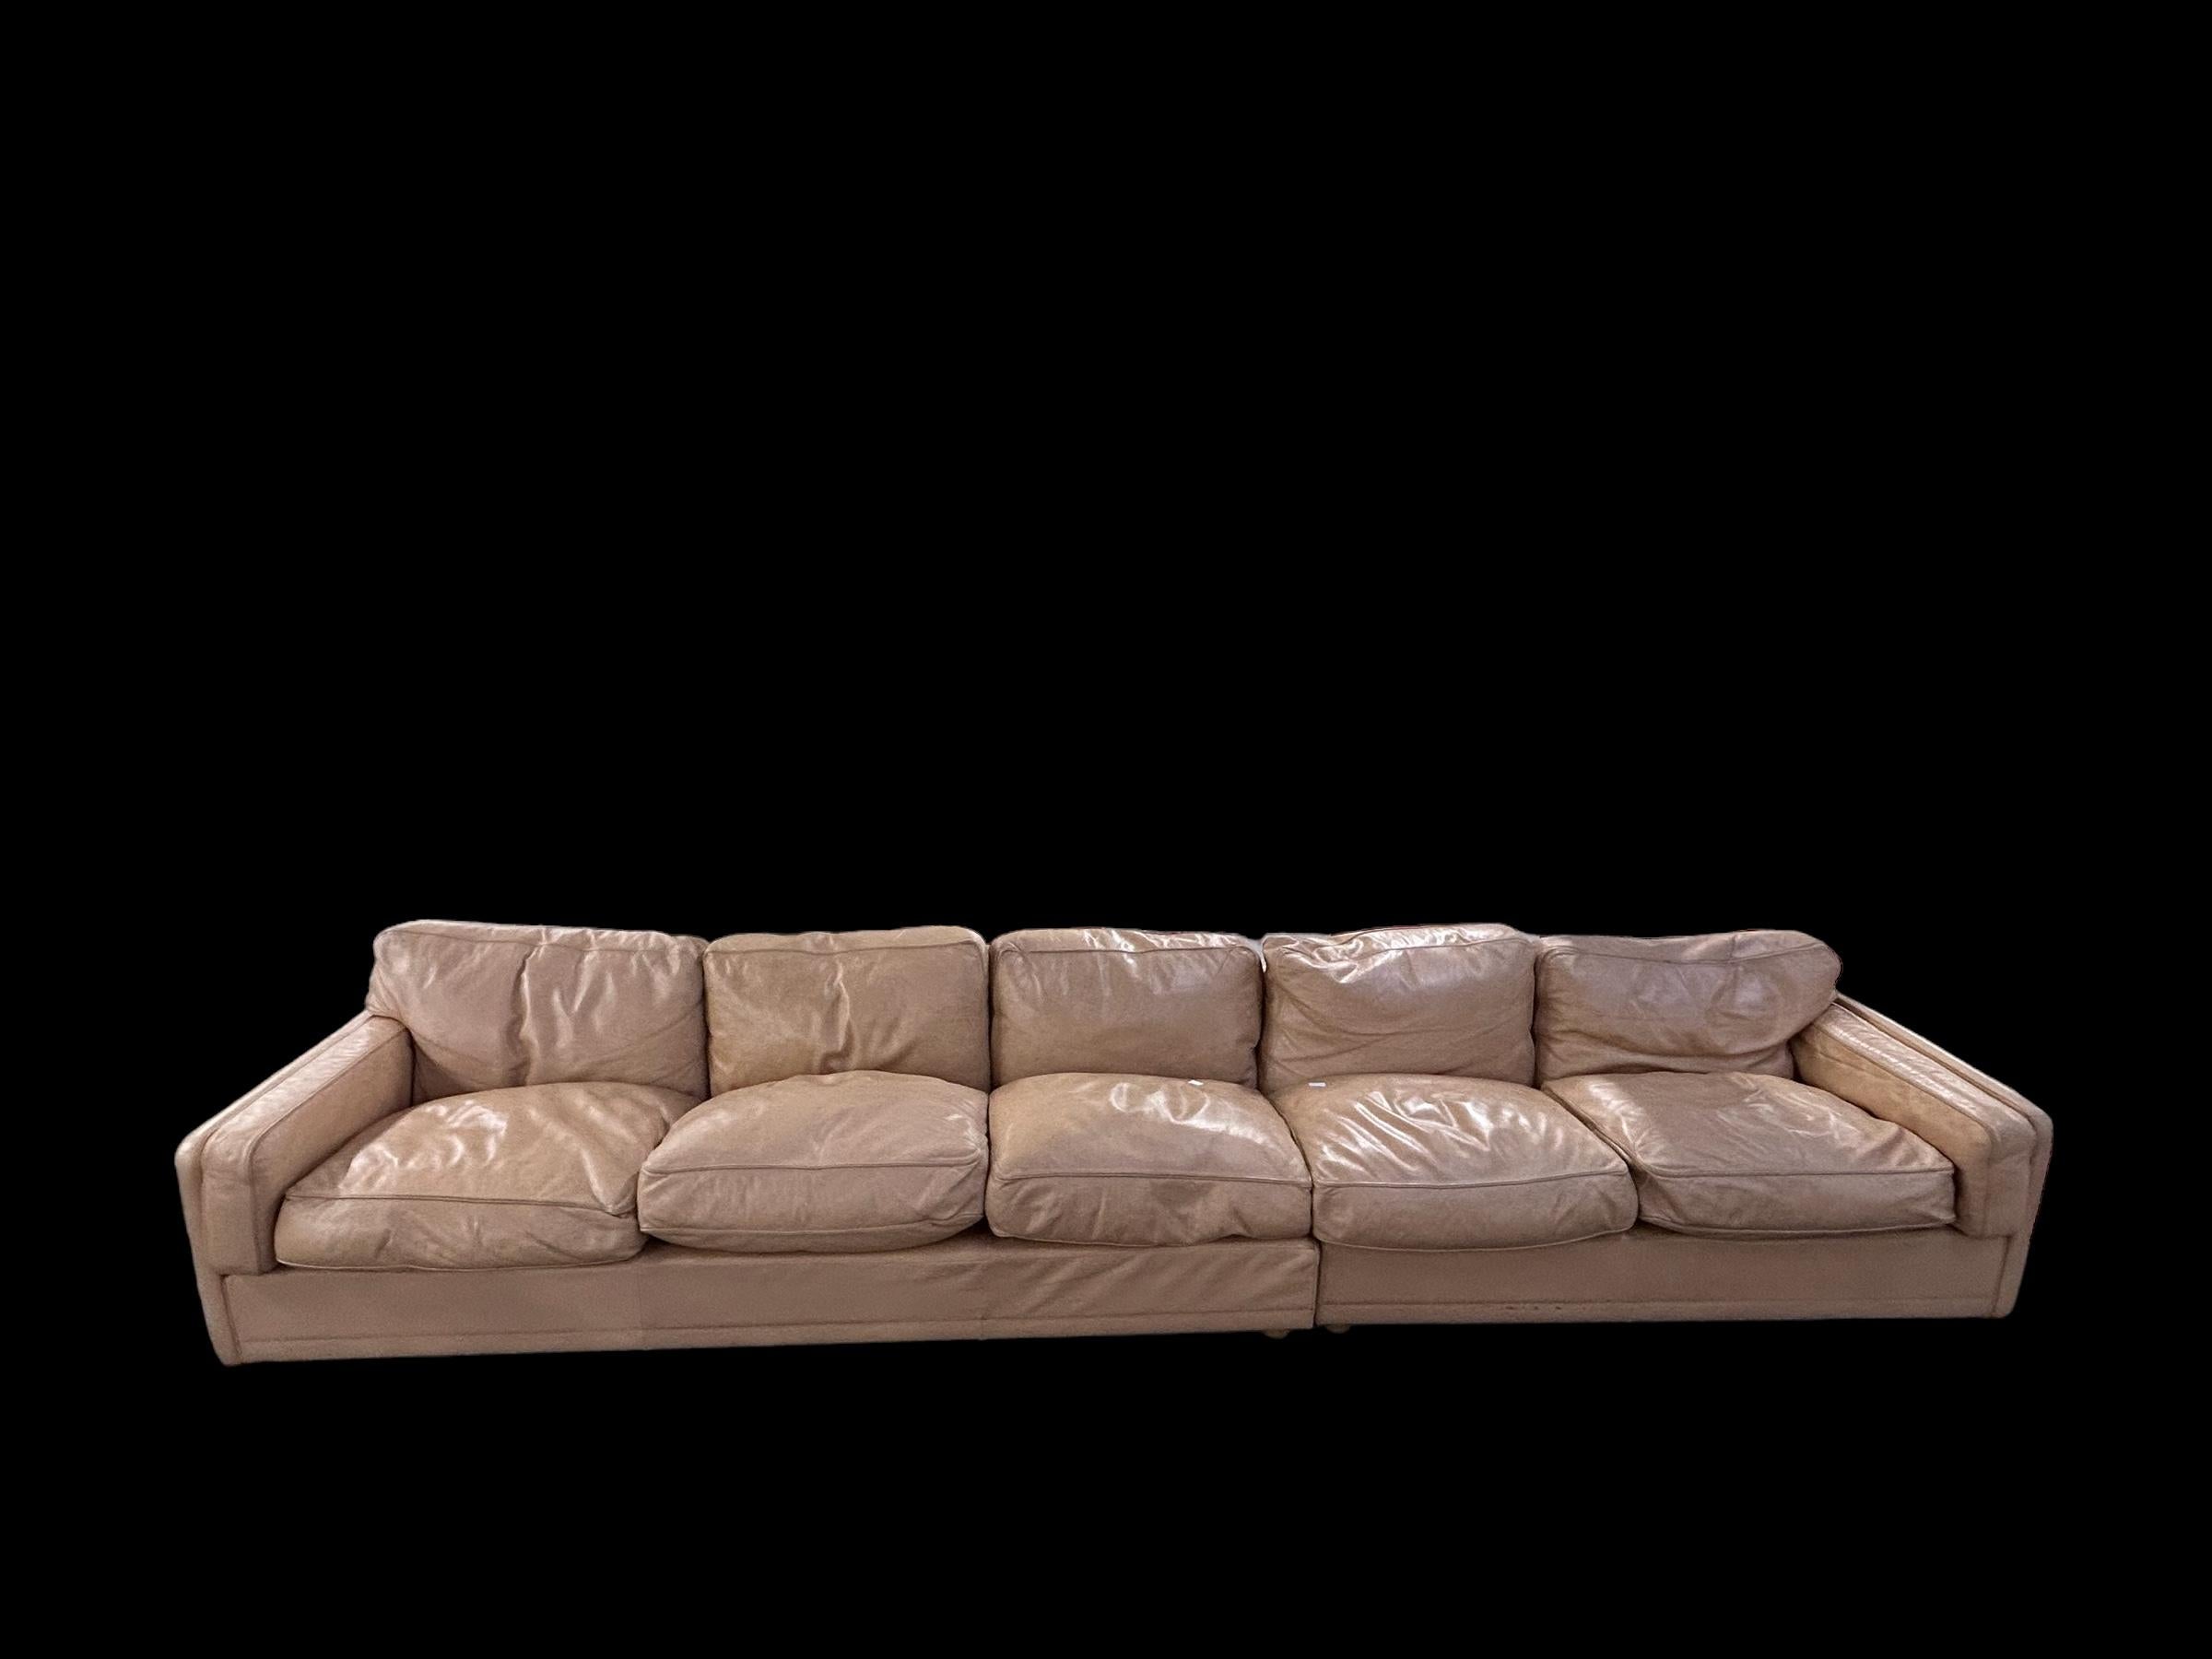 Iconic sofa made by Poltrona Frau in the 1970's in beige leather with large cozy cushions
Sofa is made of two pieces ( 220cm & 160cm ) that could be held together of used as an angle with the matching coffee table 

